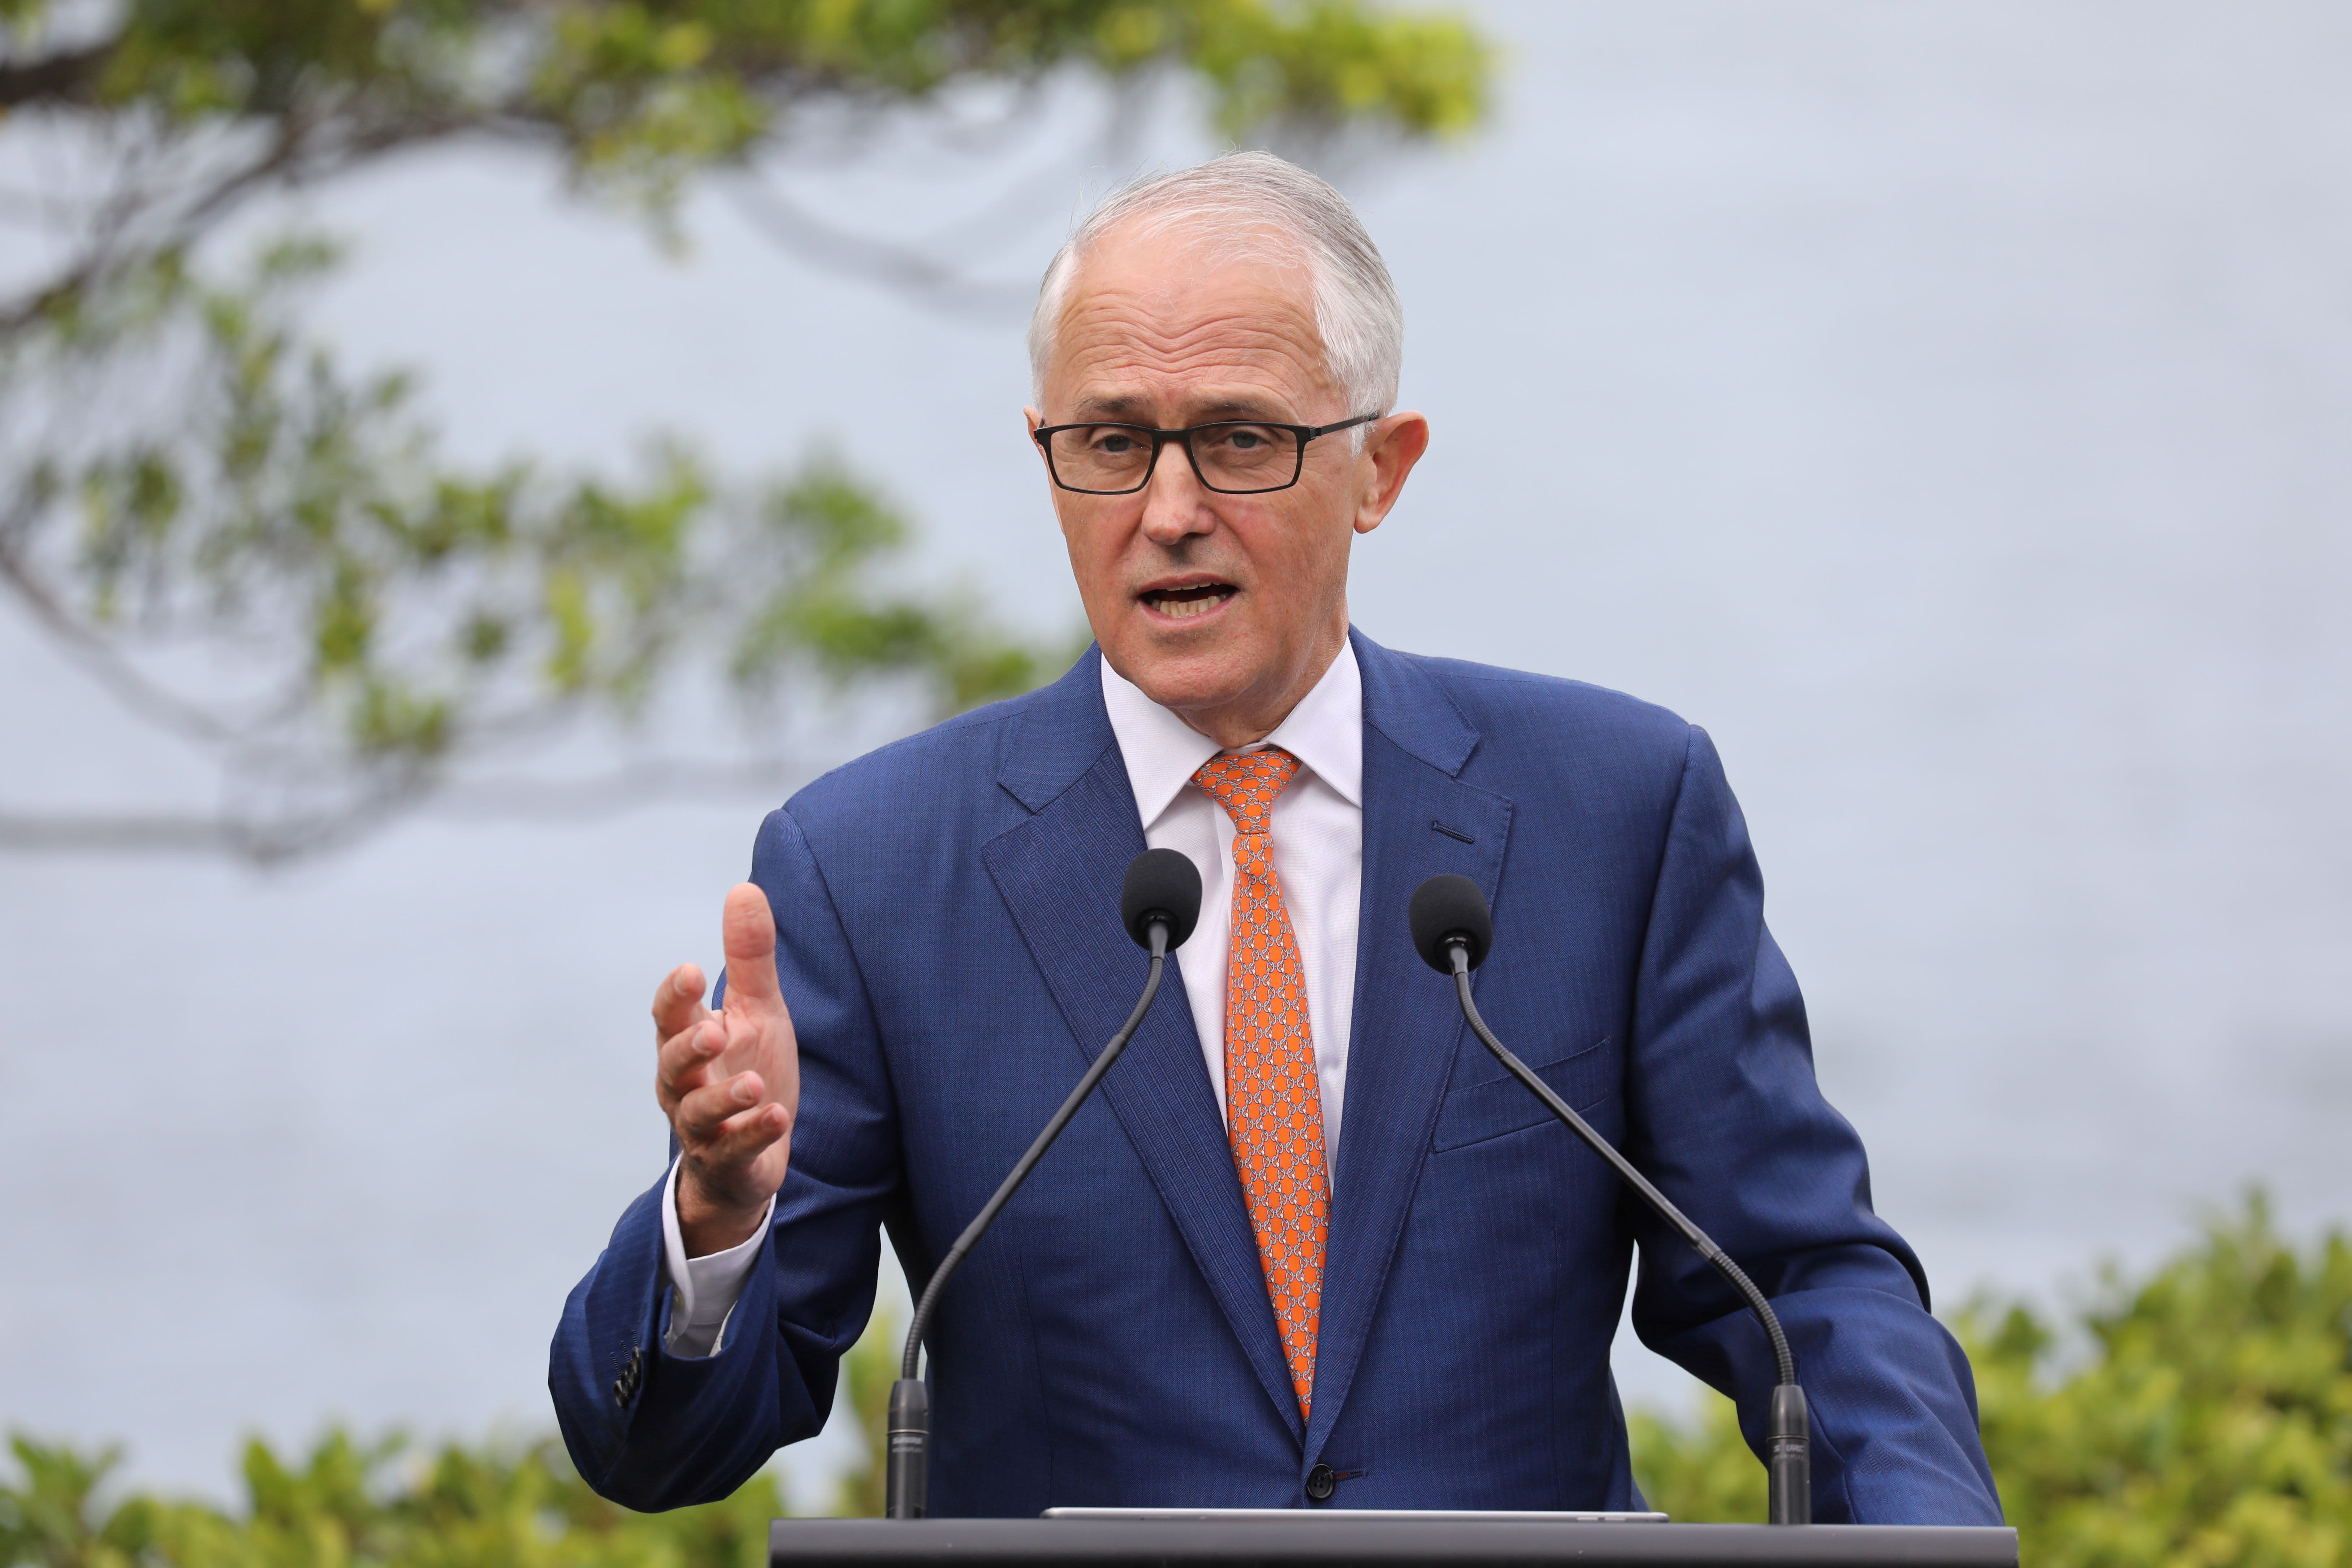 Former Australian Prime Minister Turnbull says 'clean coal' is a scam